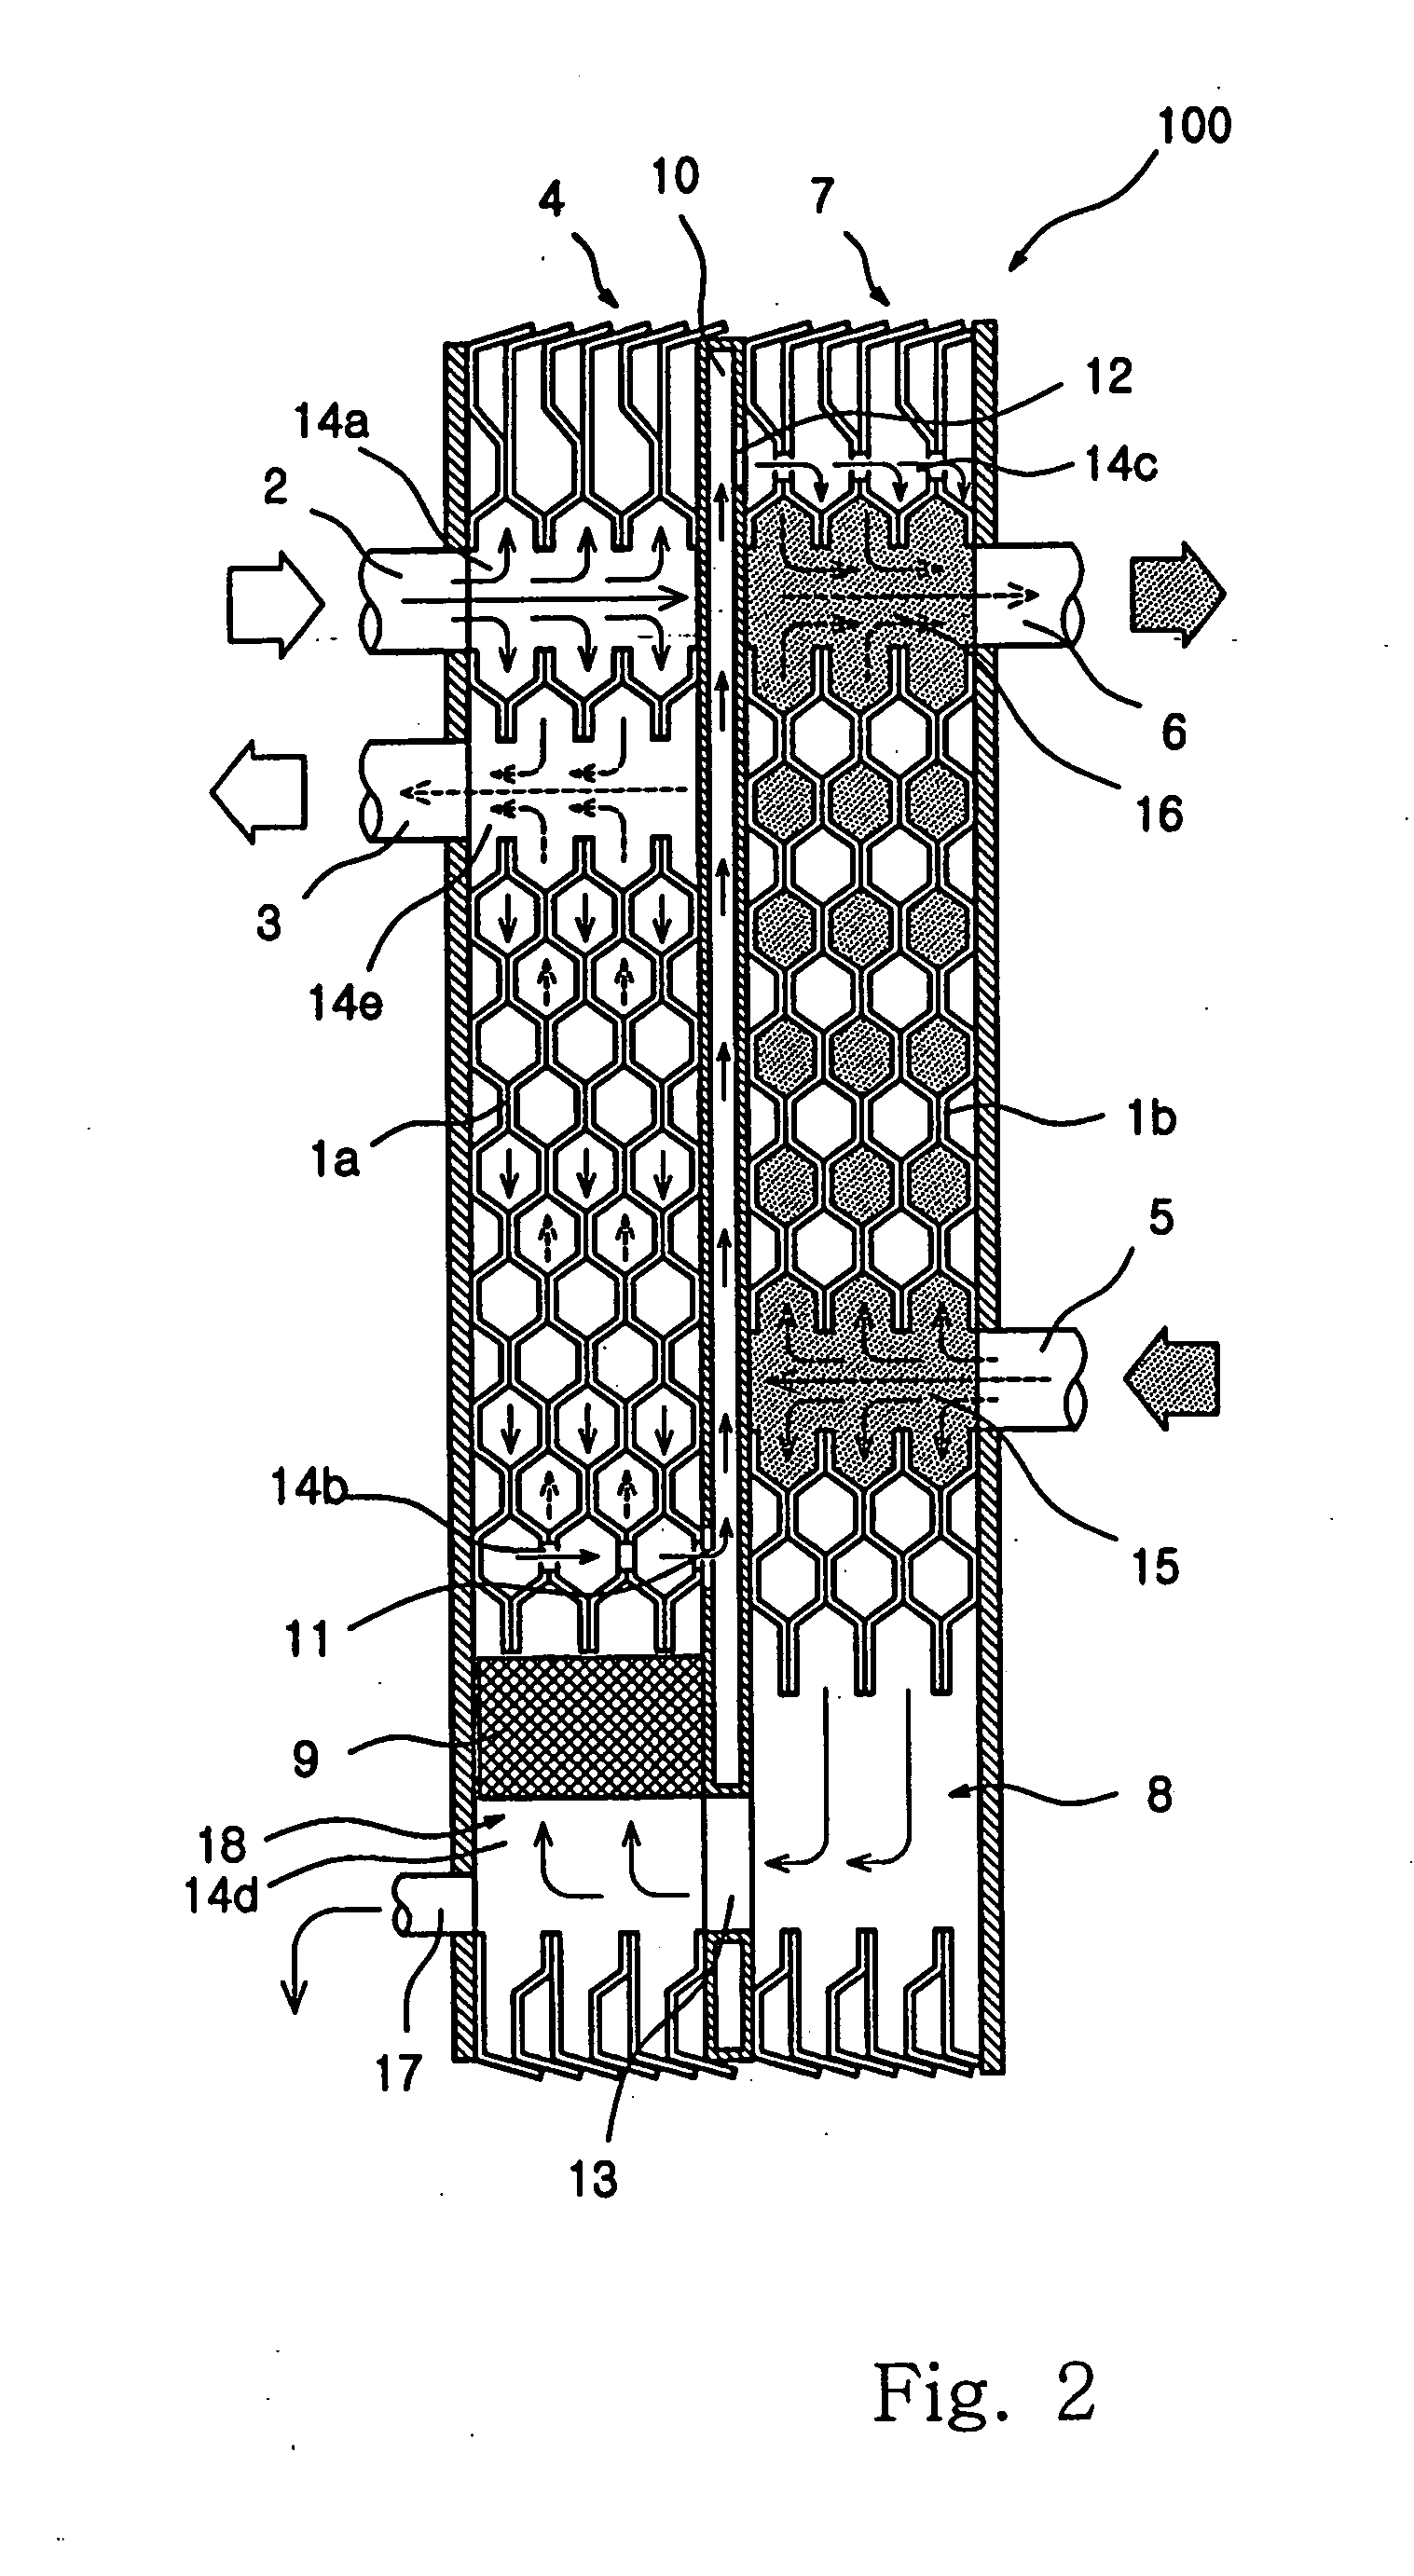 Plate heat exchanger with condensed fluid separating functions and its manufacturing method